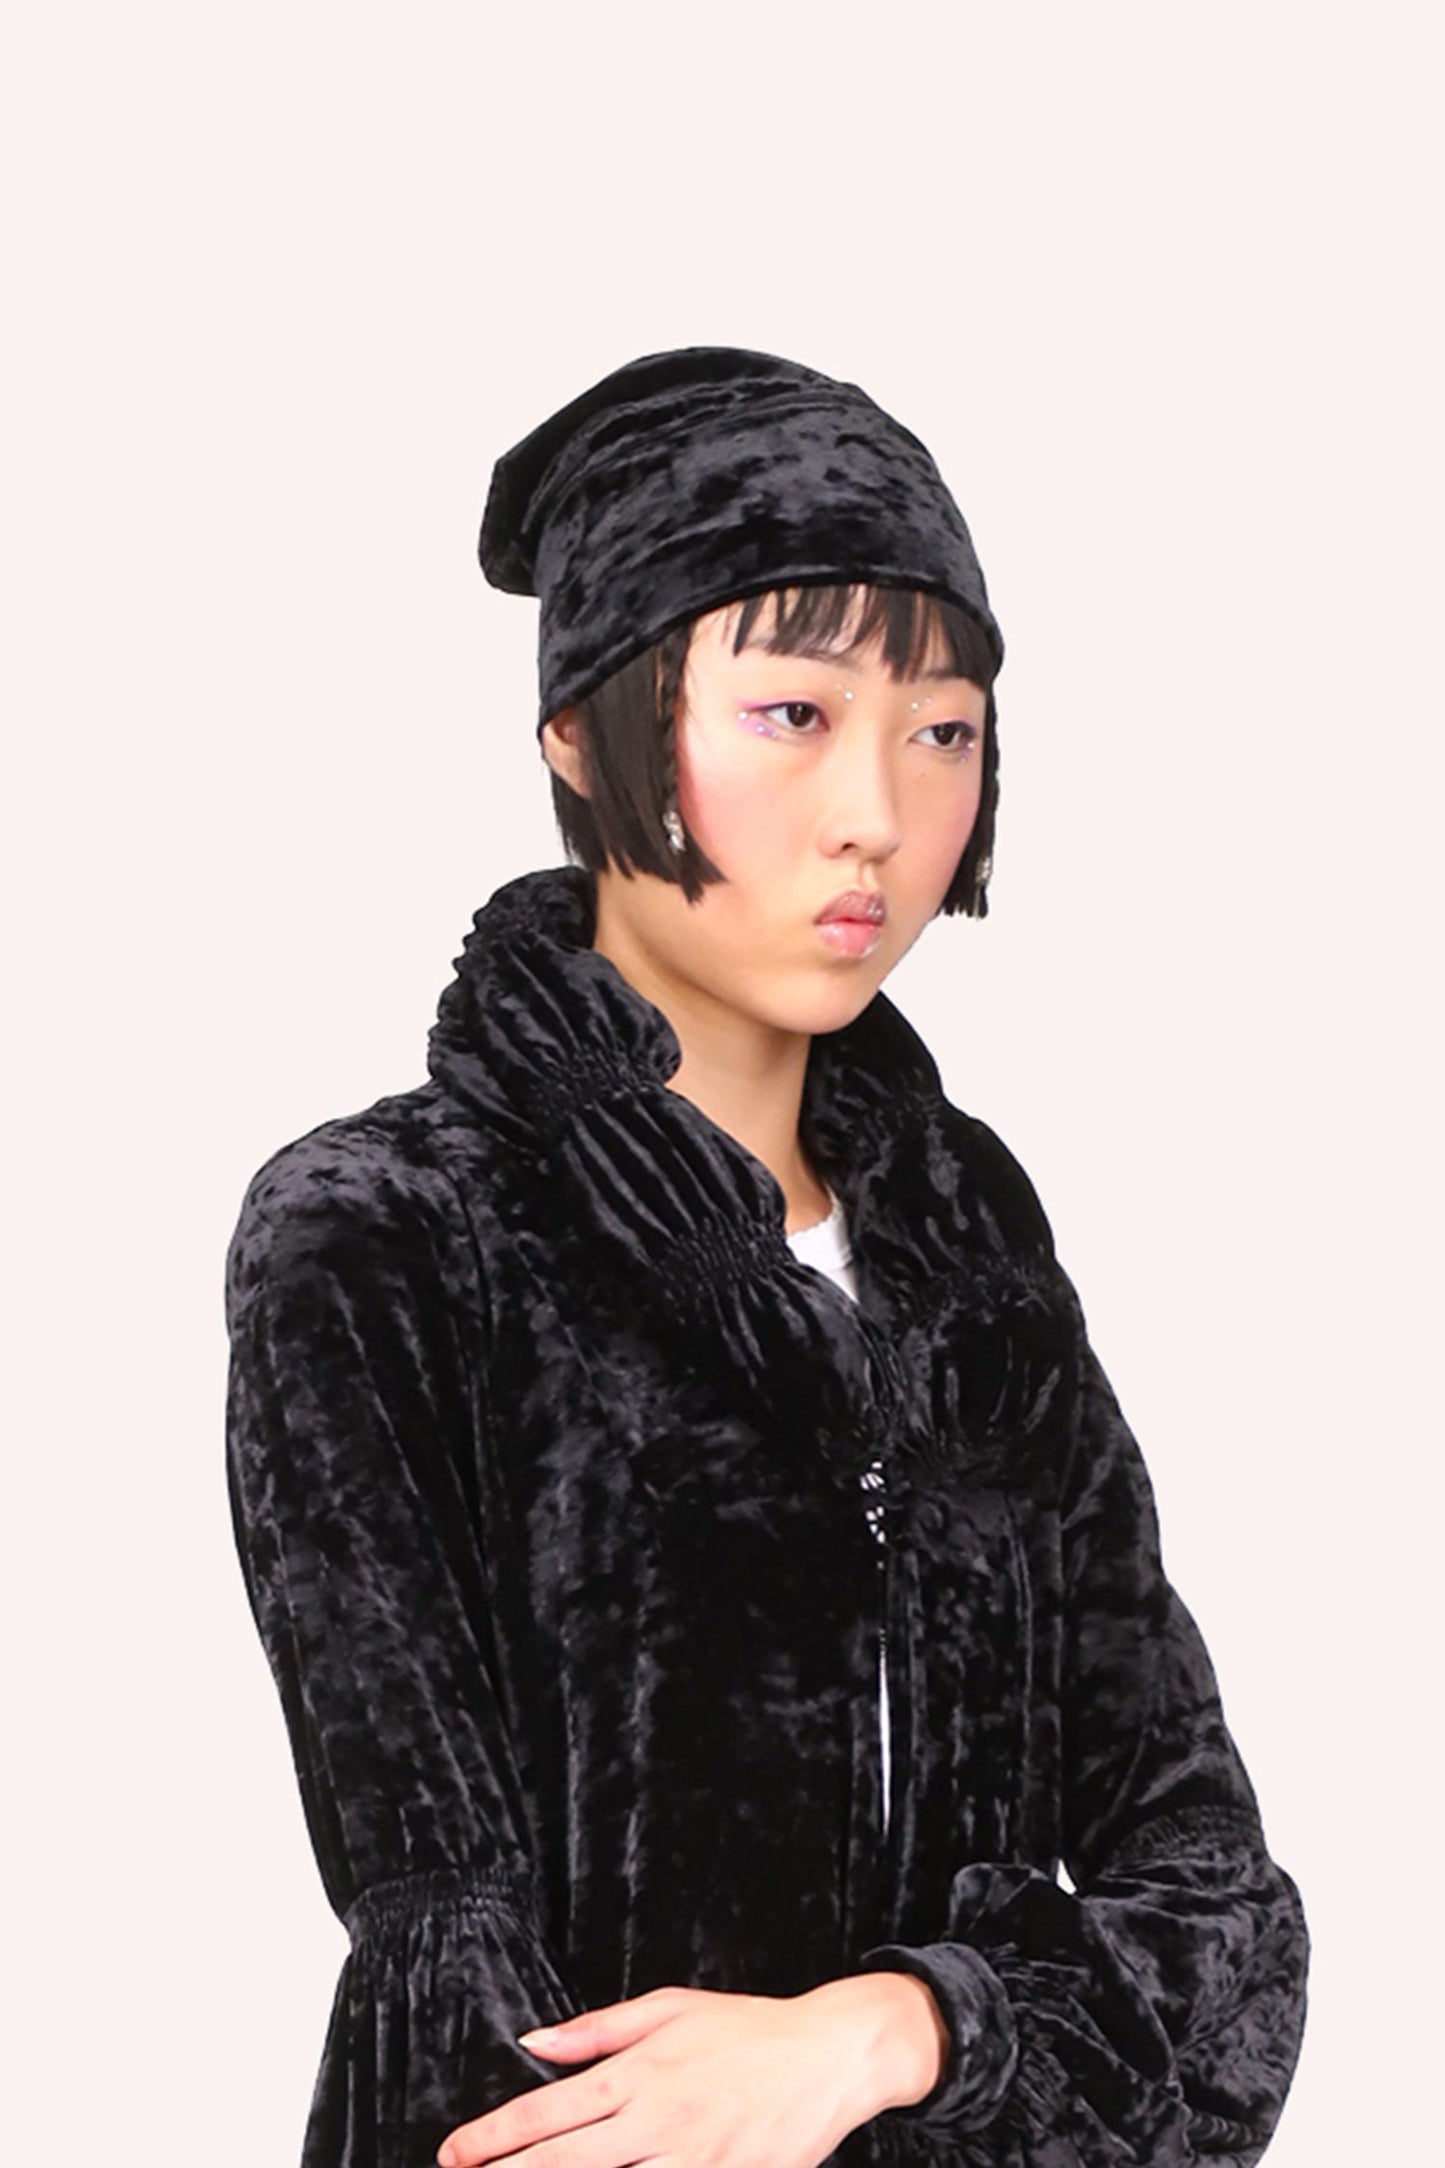 Stretch Velvet Beanie in black, with shiny effects, large grey stitches that run around it